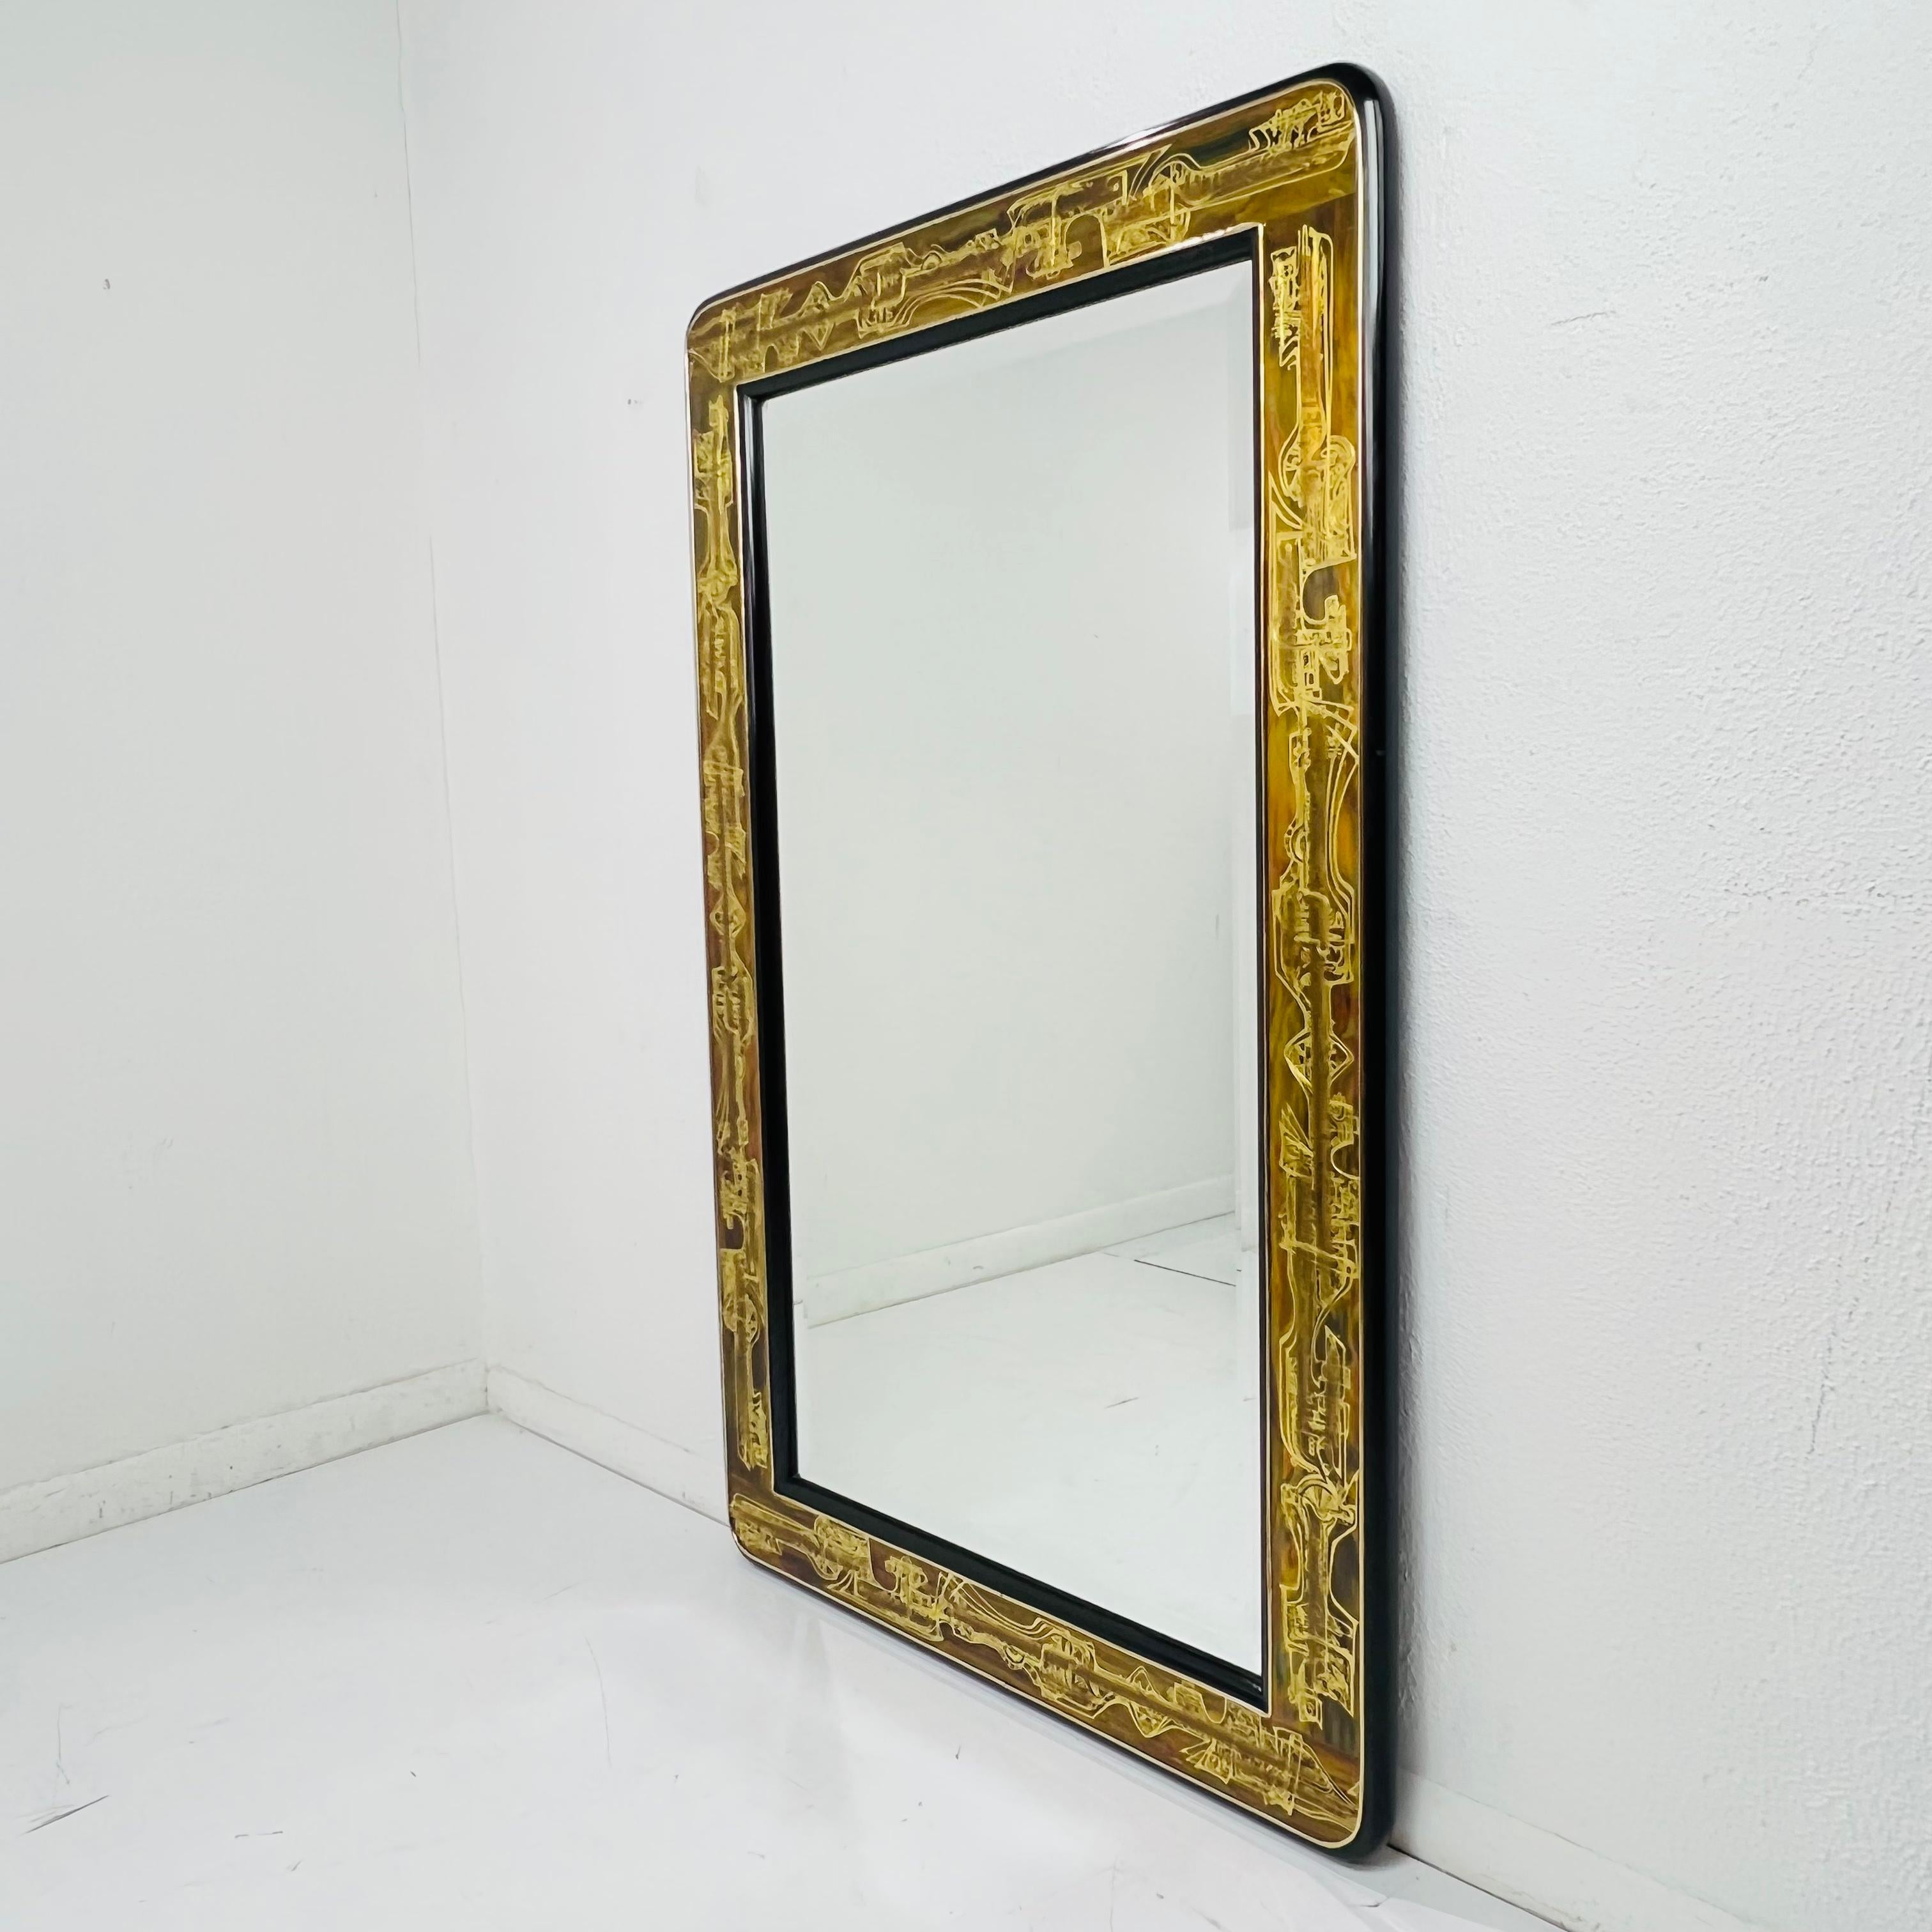 This sophisticated wall mirror was designed by Bernard Rohne and realized for the esteemed American maker, Mastercraft, circa 1970. The brass interior of the frame features organic and futuristic acid etched detailing and is framed on either side by